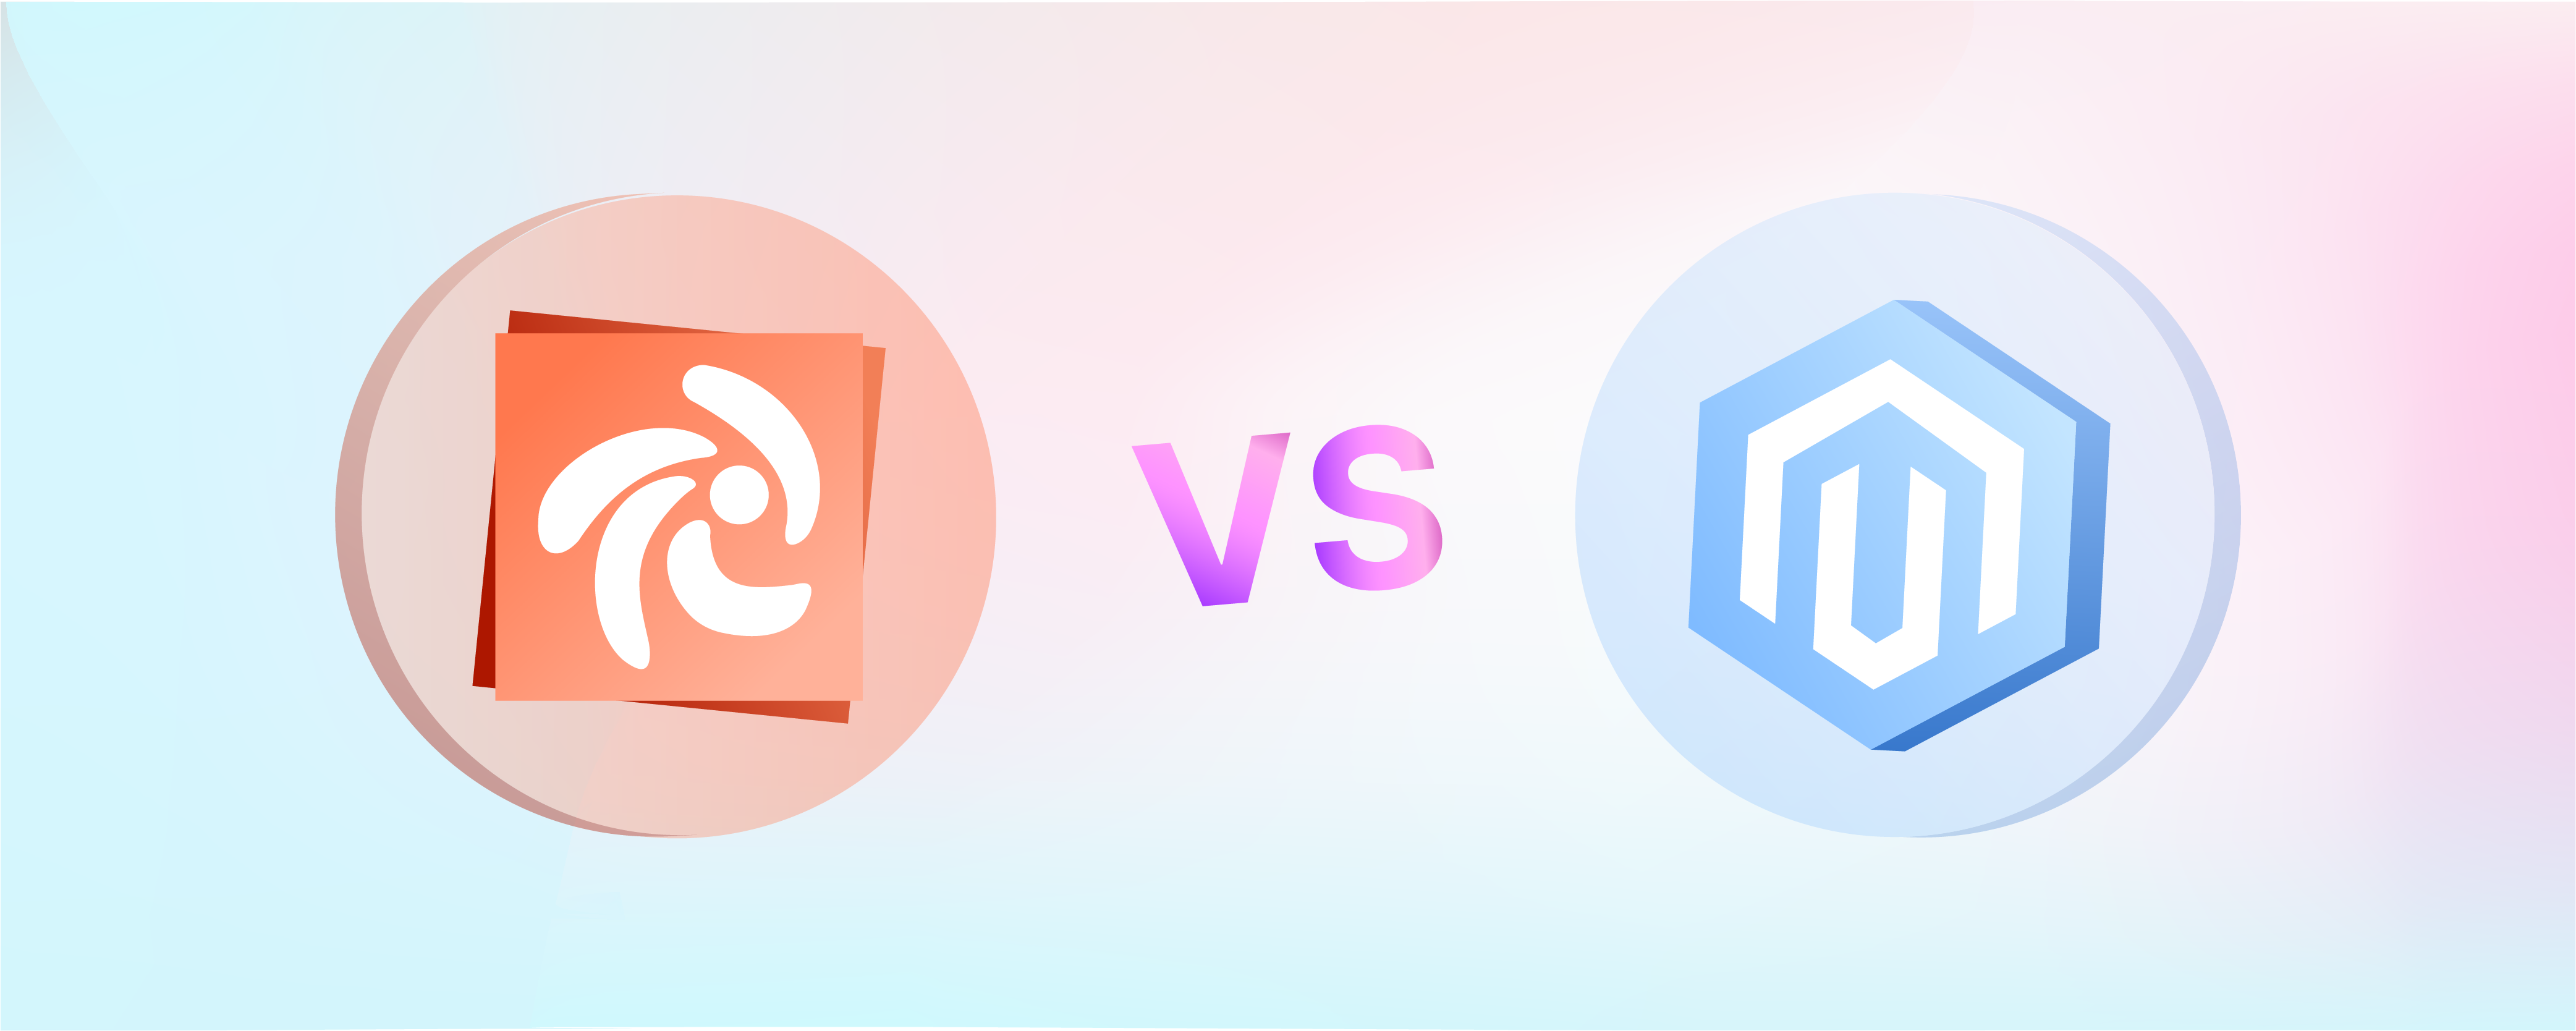 Zencart vs Magento: Similarities and Differences